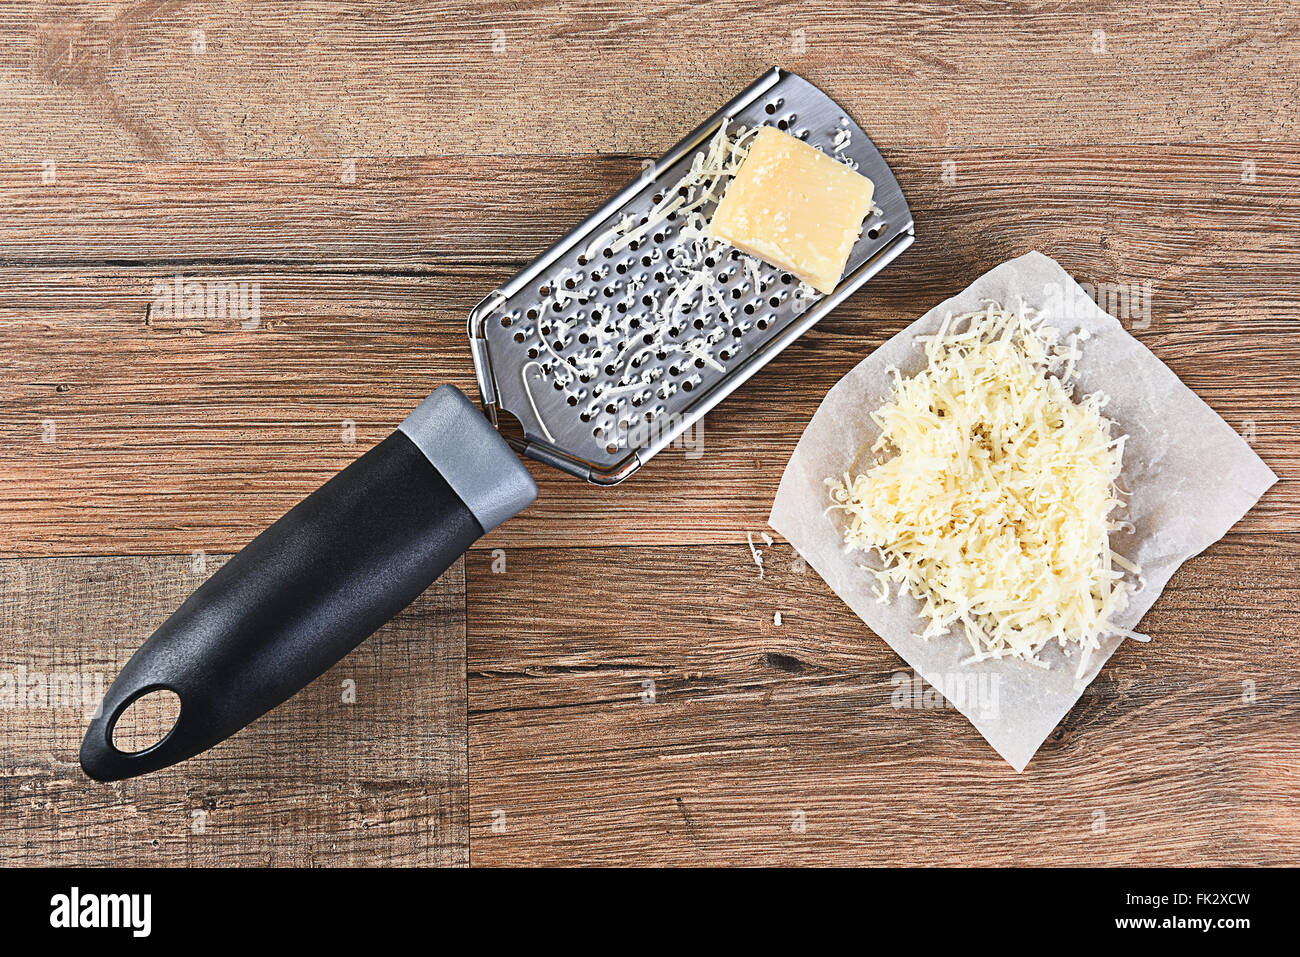 Parmesan Cheese and grater on a wood kitchen table. Some grated cheese is on a piece of parchment paper next to the grater. High Stock Photo